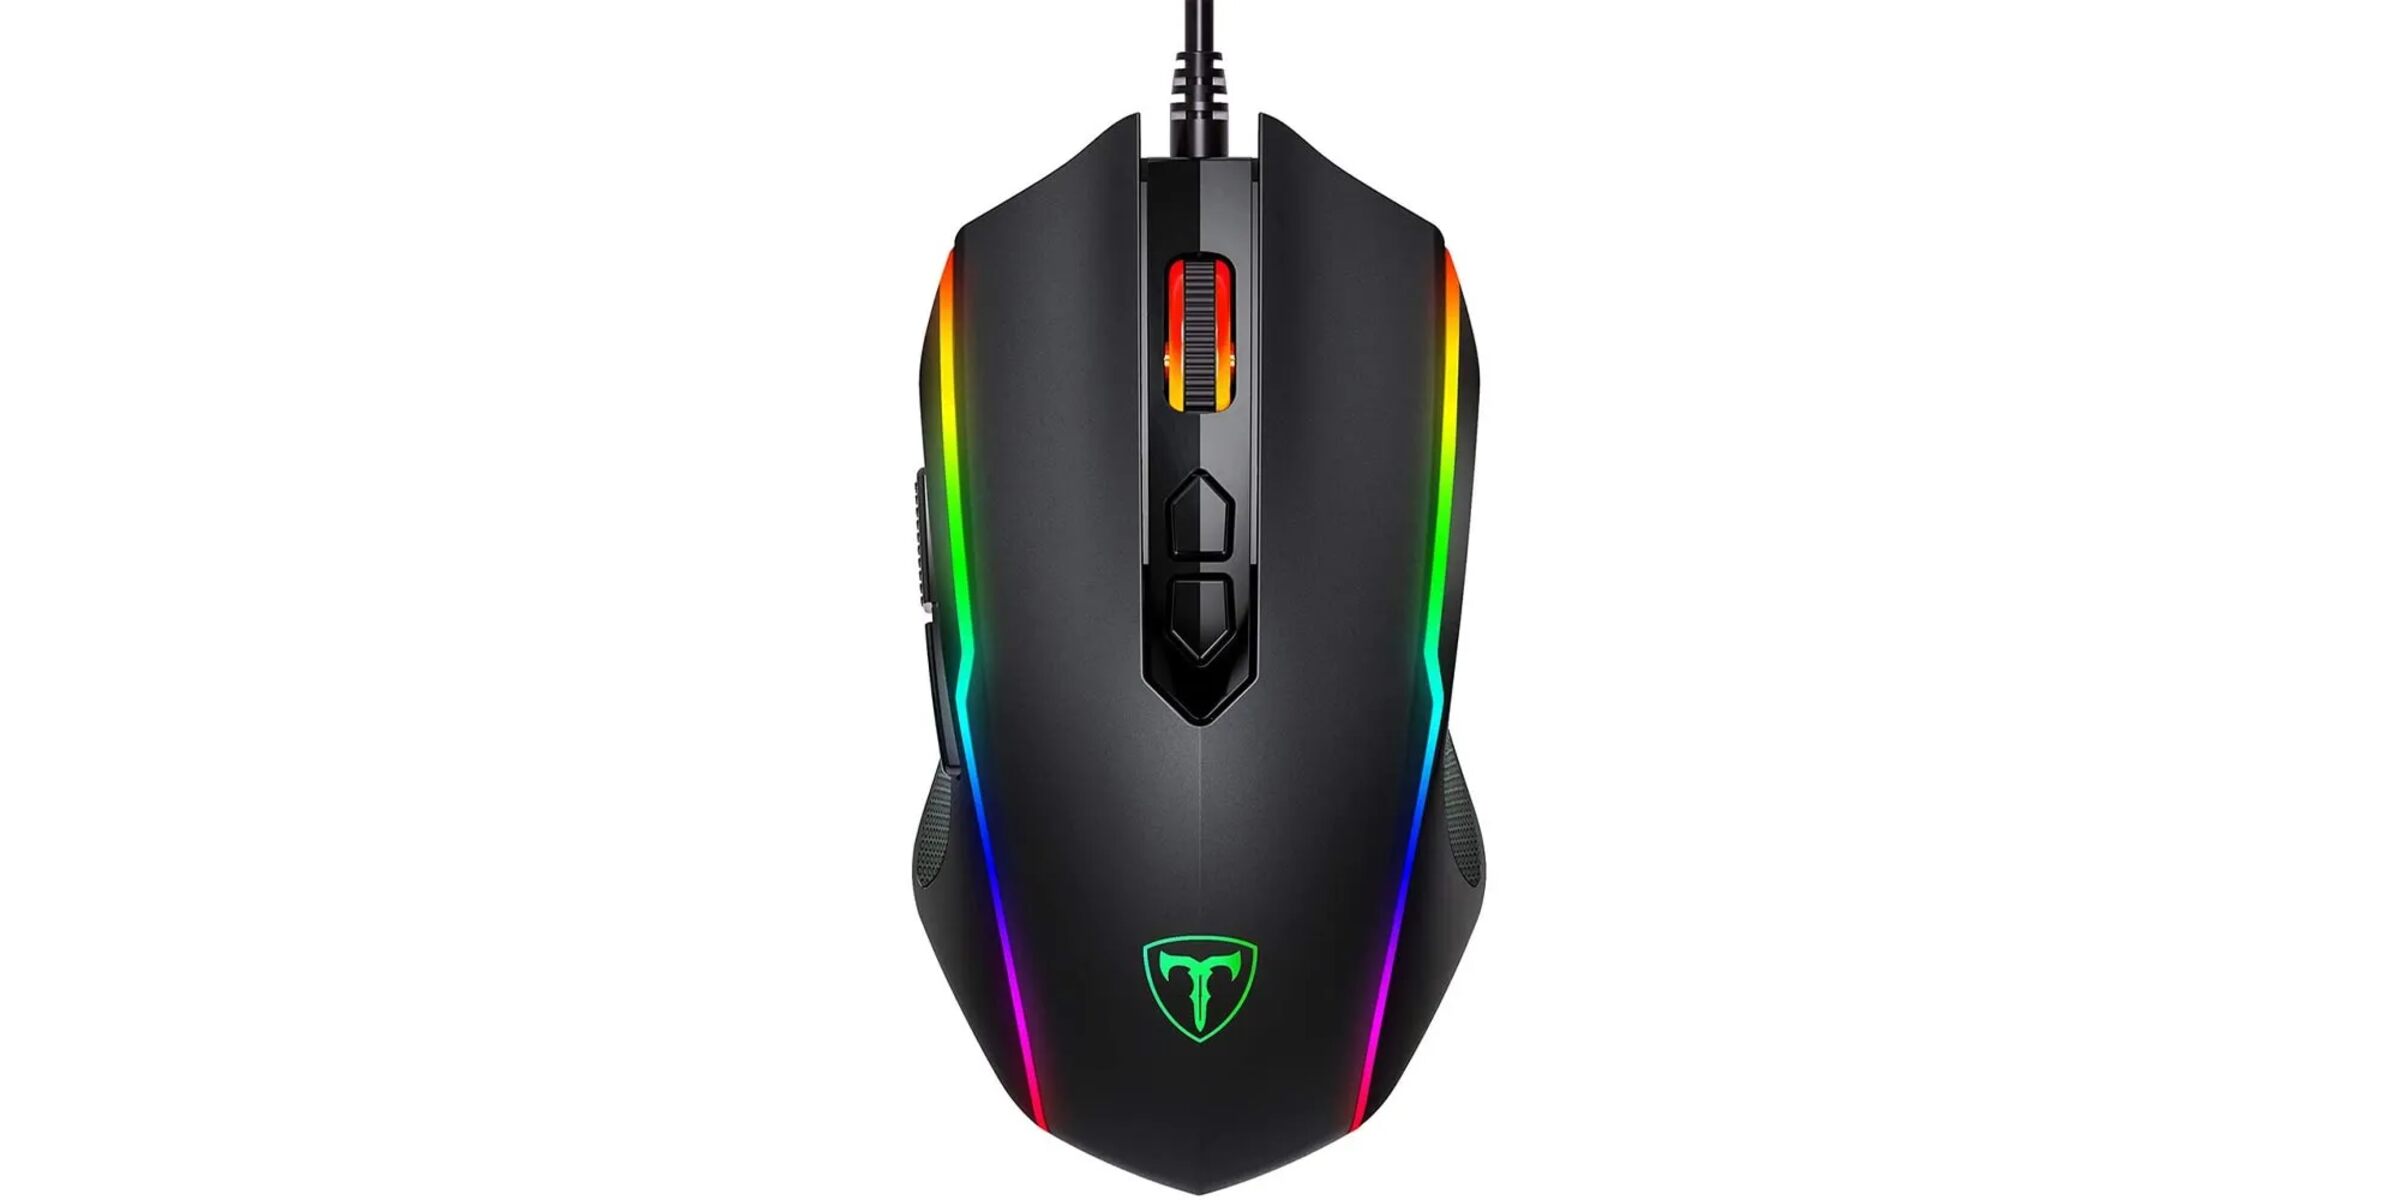 How To Set Up Pictek Gaming Mouse